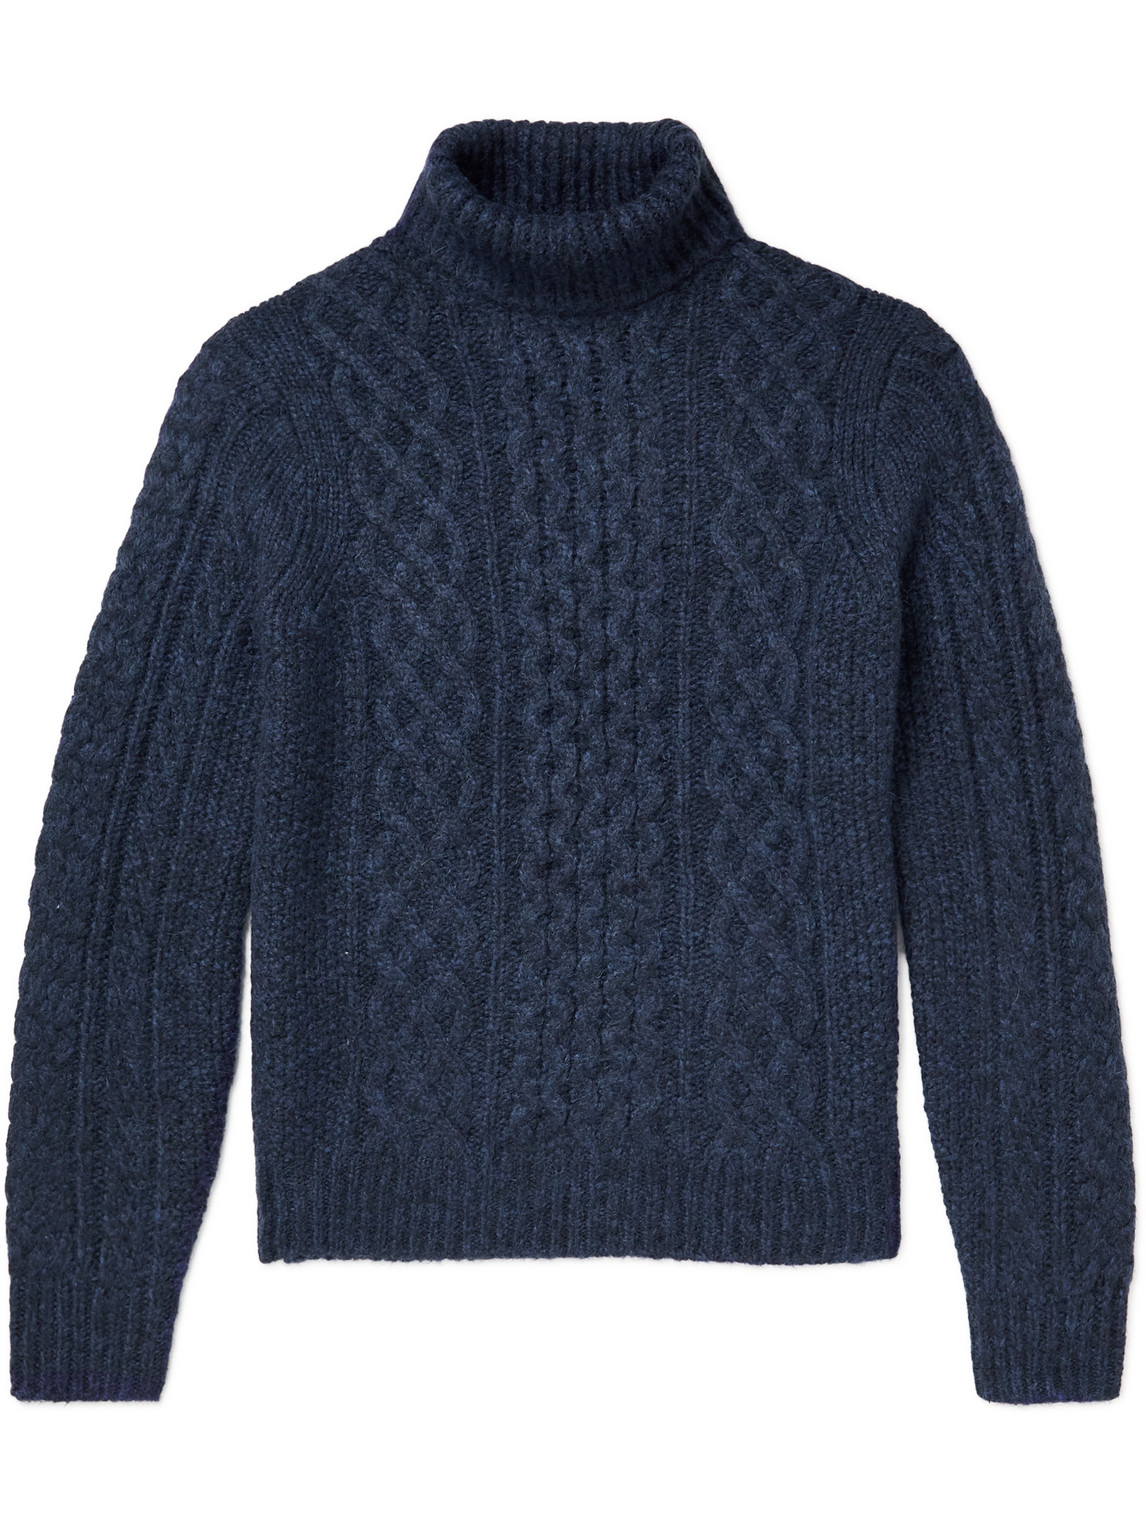 Alex Mill - Recycled Cable-Knit Rollneck Sweater - Men - Blue - M von Alex Mill